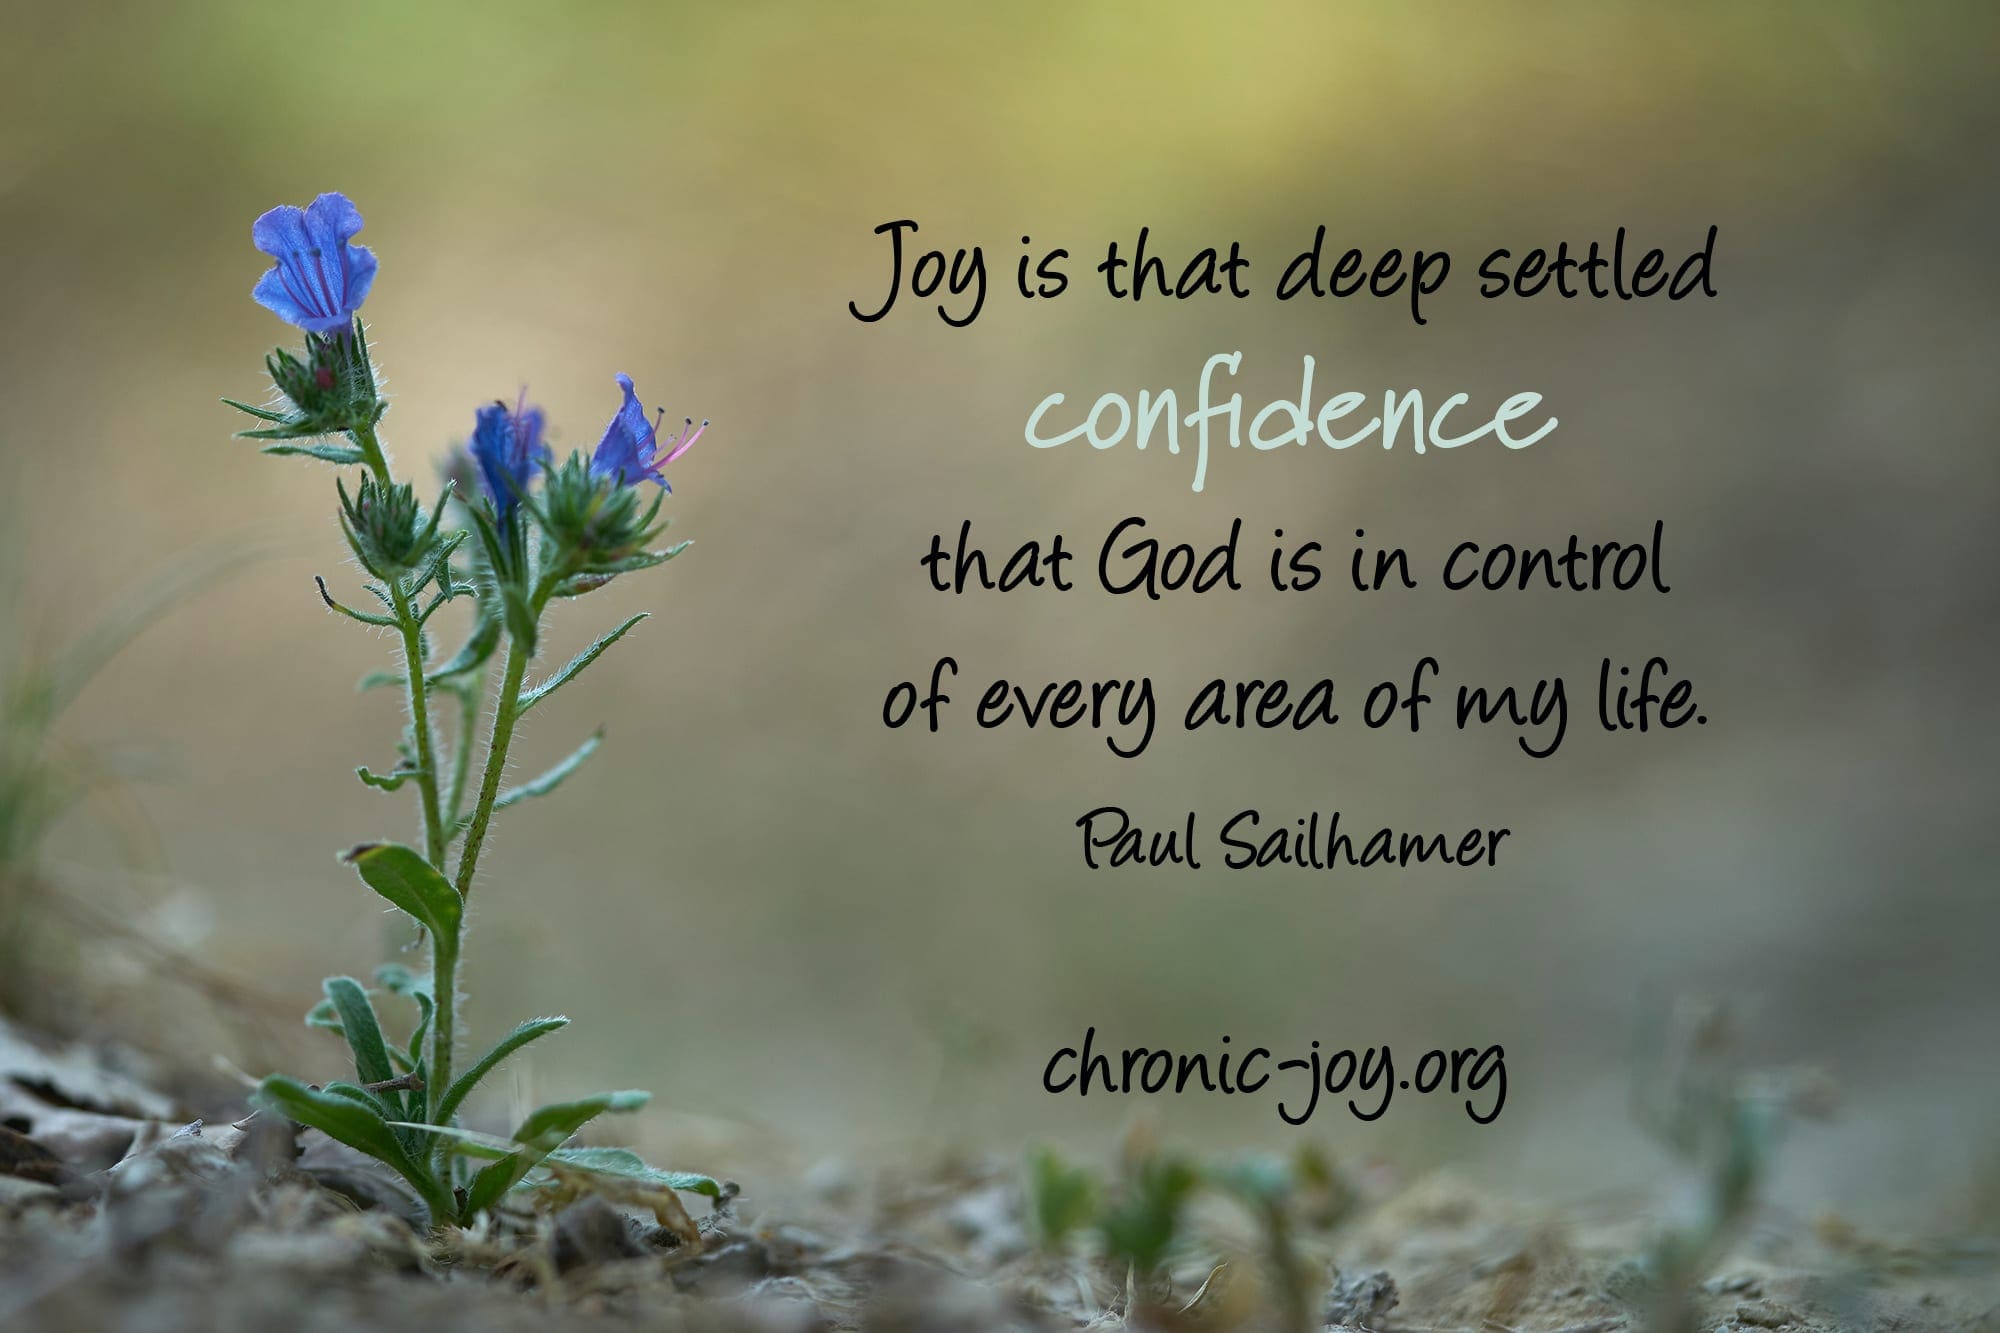 "Joy is that deep seated confidence that God is in control of every area of my life." Paul Sailhamer